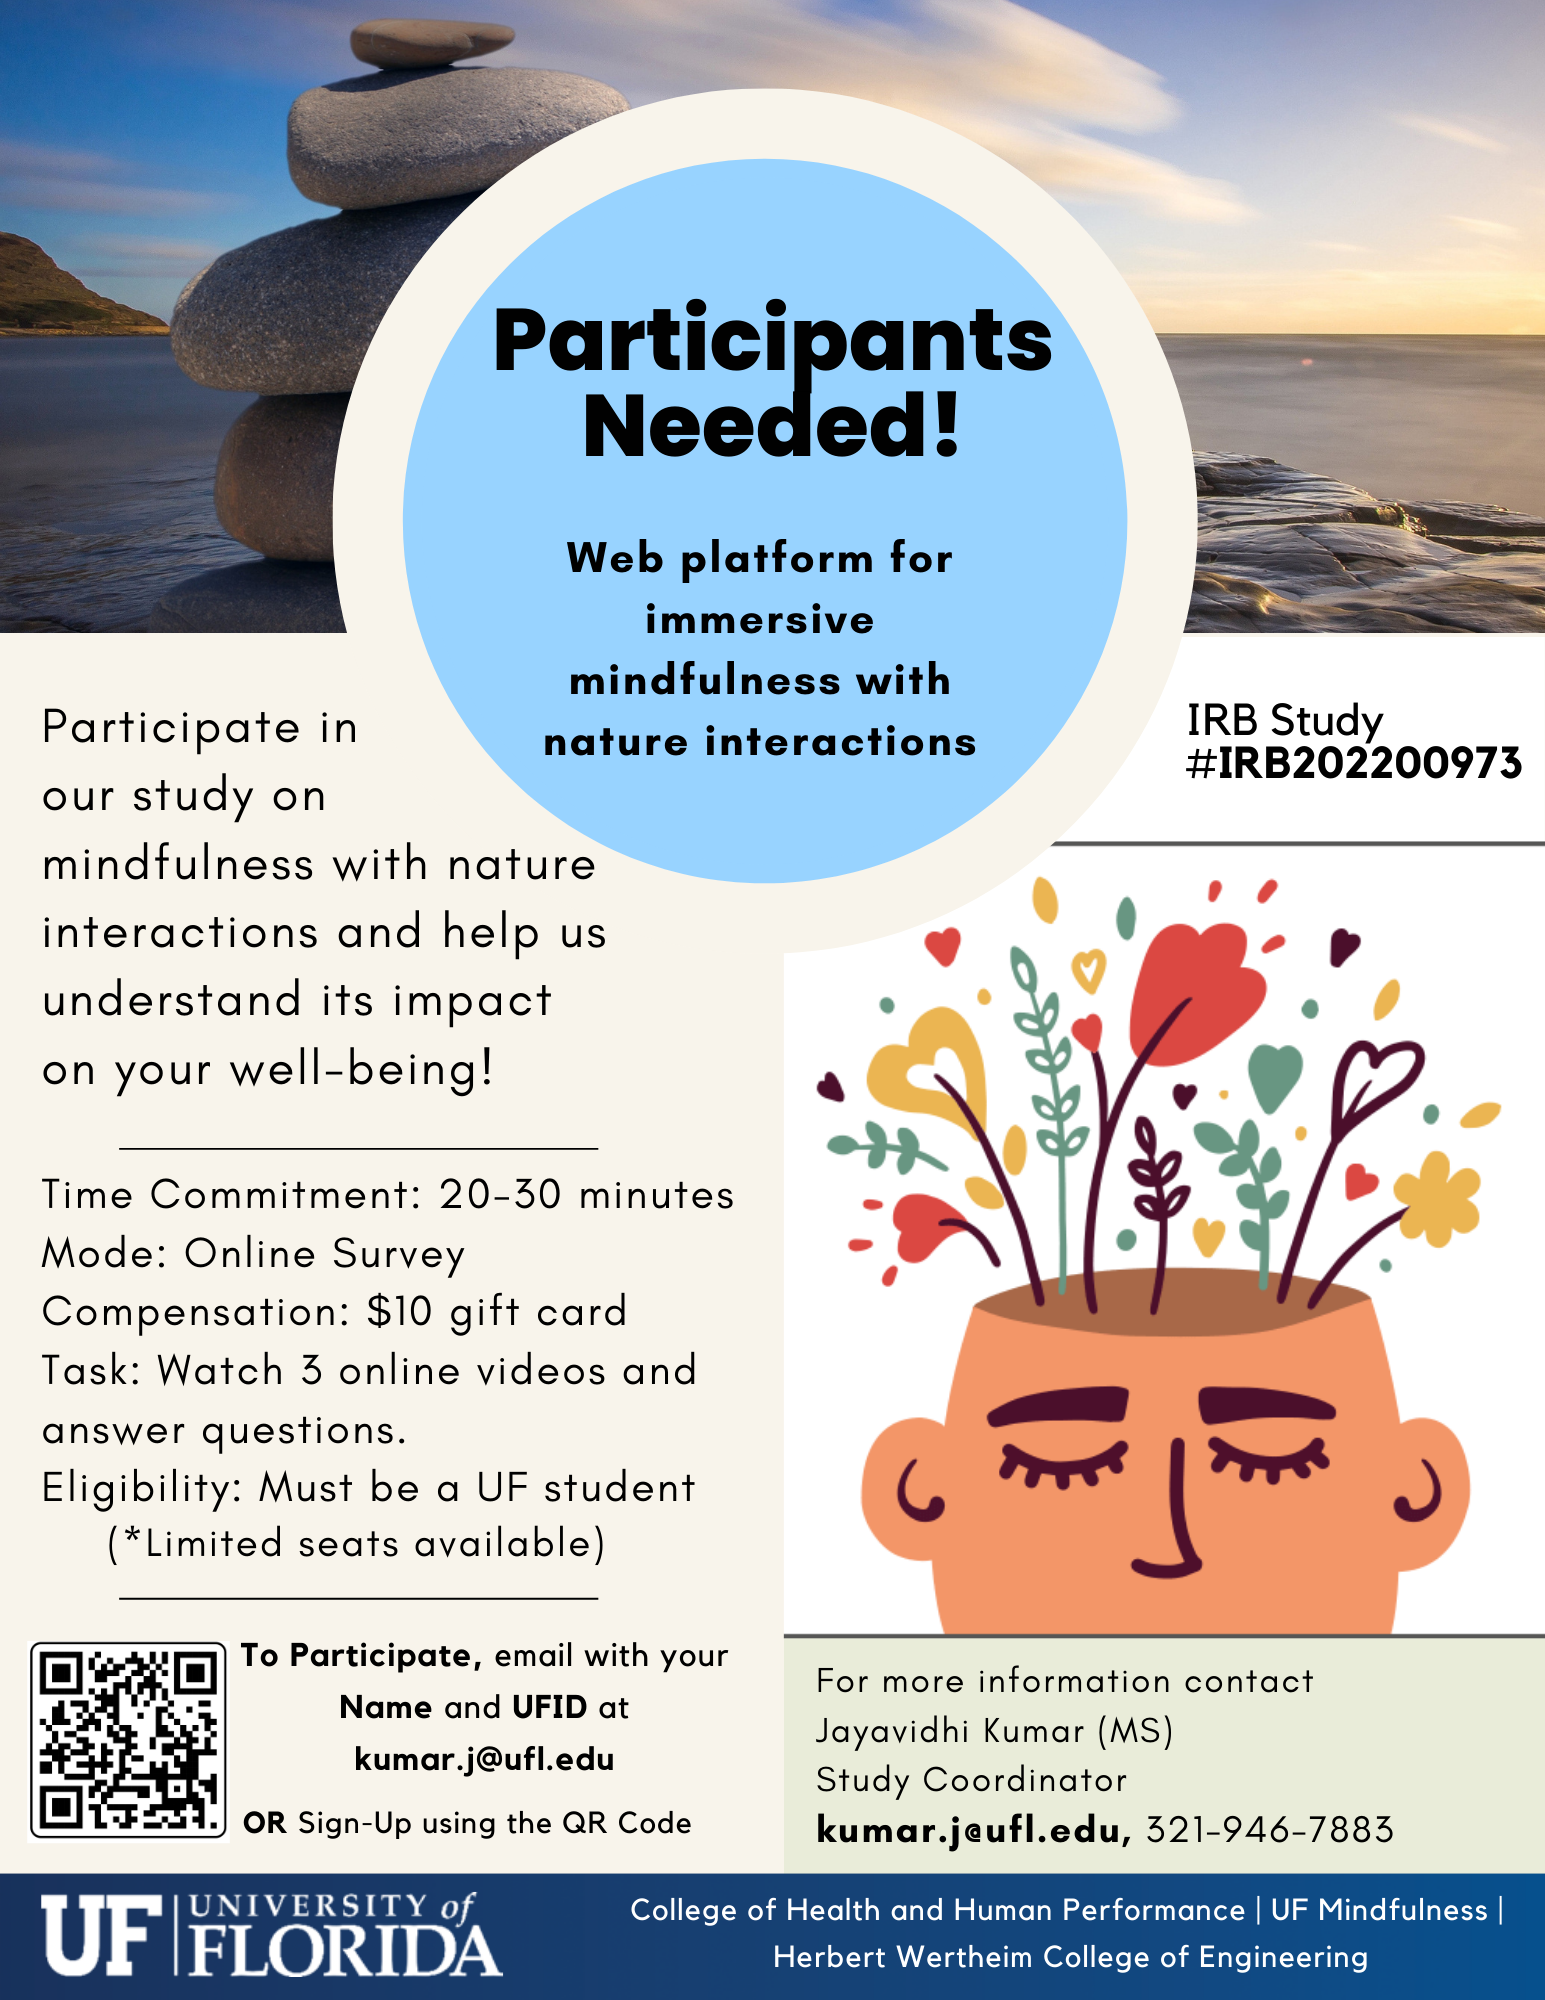 A flyer soliciting participants for the study. The flyer has a QR code on bottom left for application.